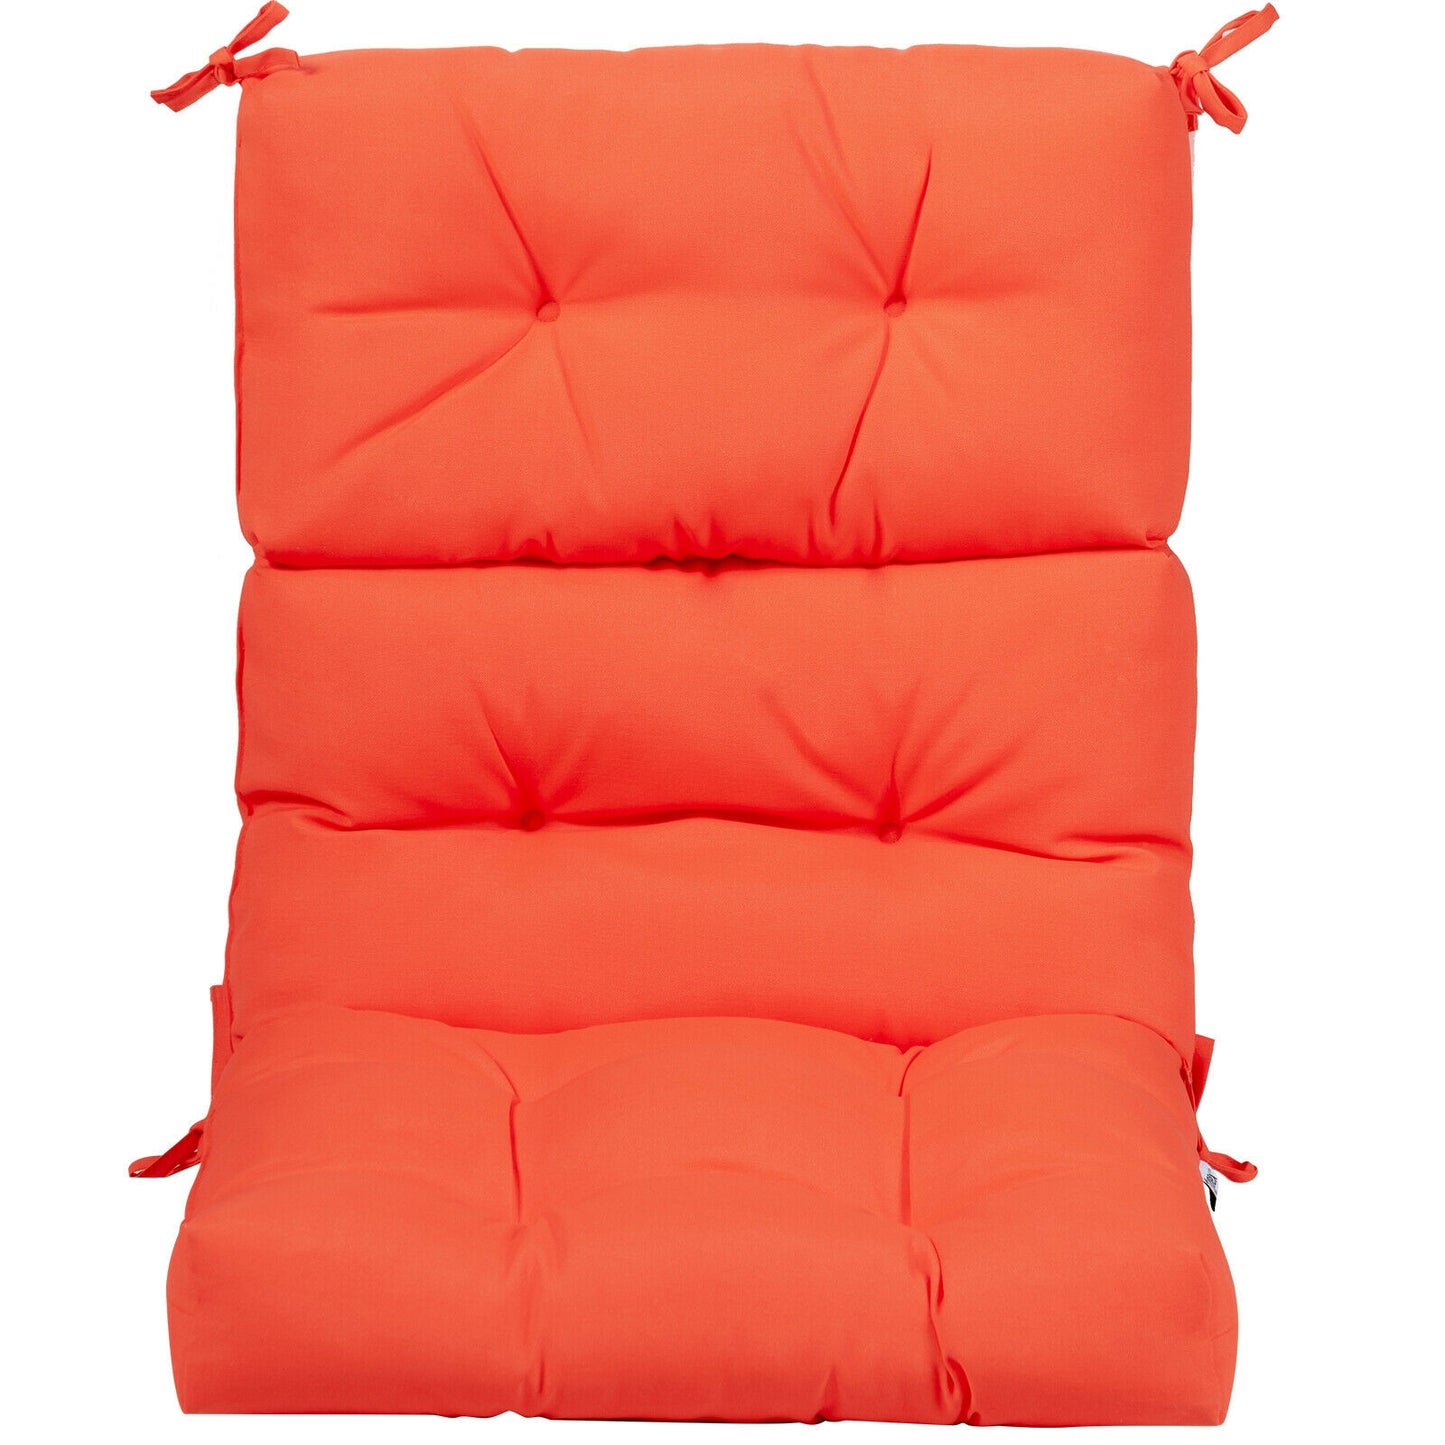 22 x 44 Inch Tufted Outdoor Patio Chair Seating Pad-Orange